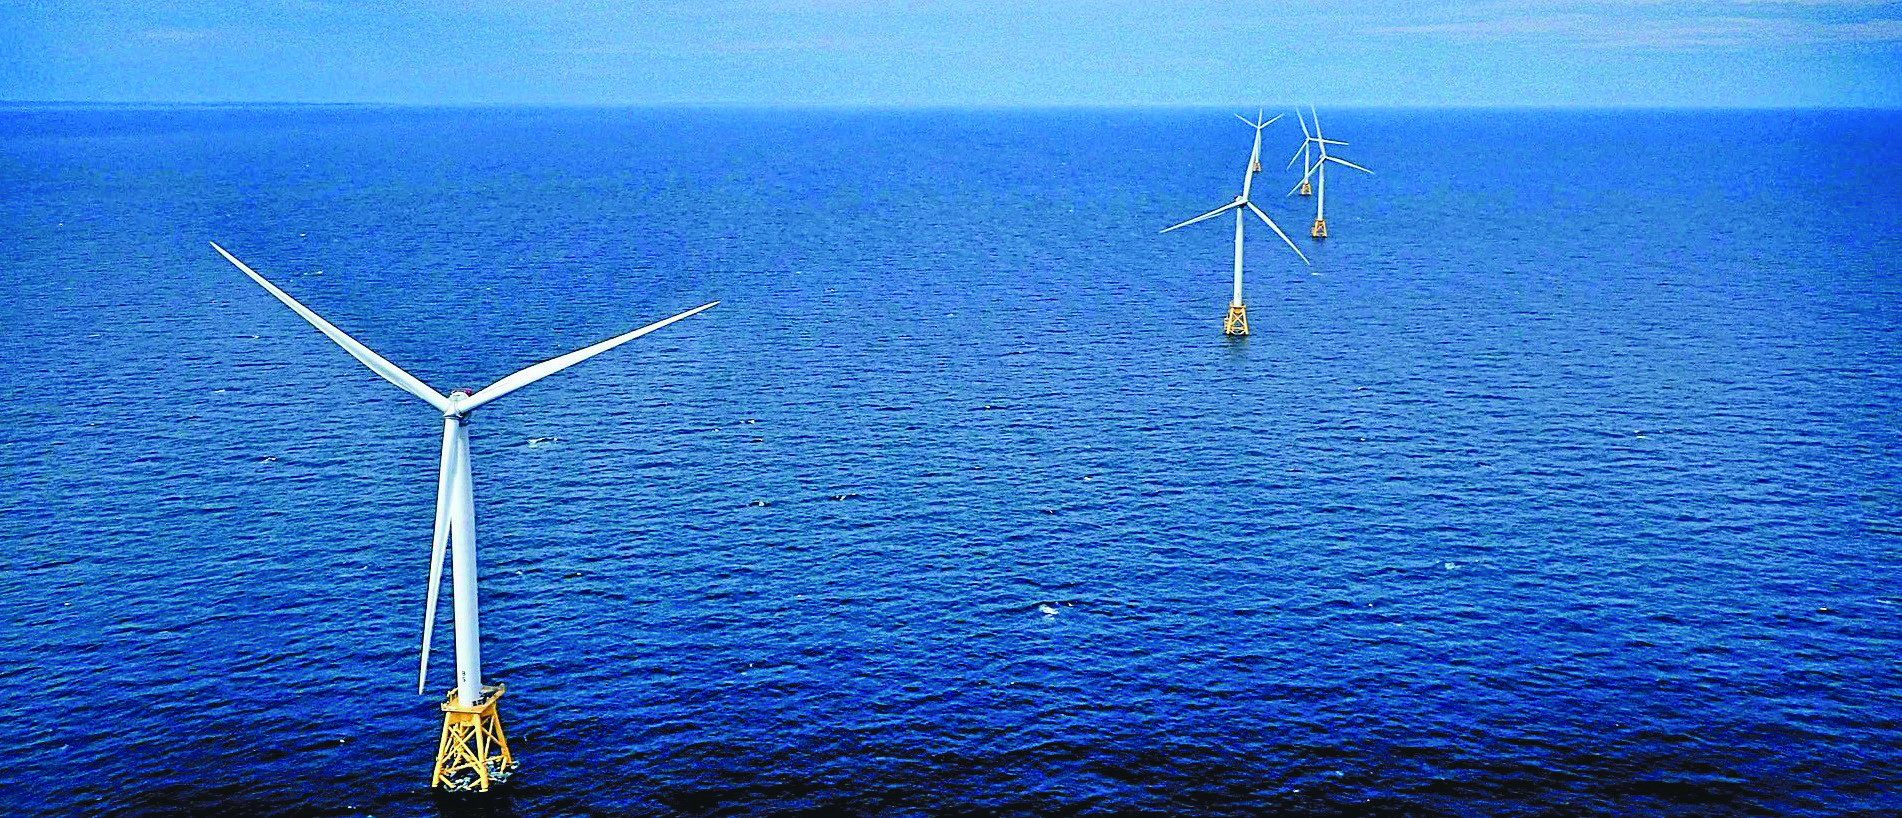 Challenges in implementing offshore wind power